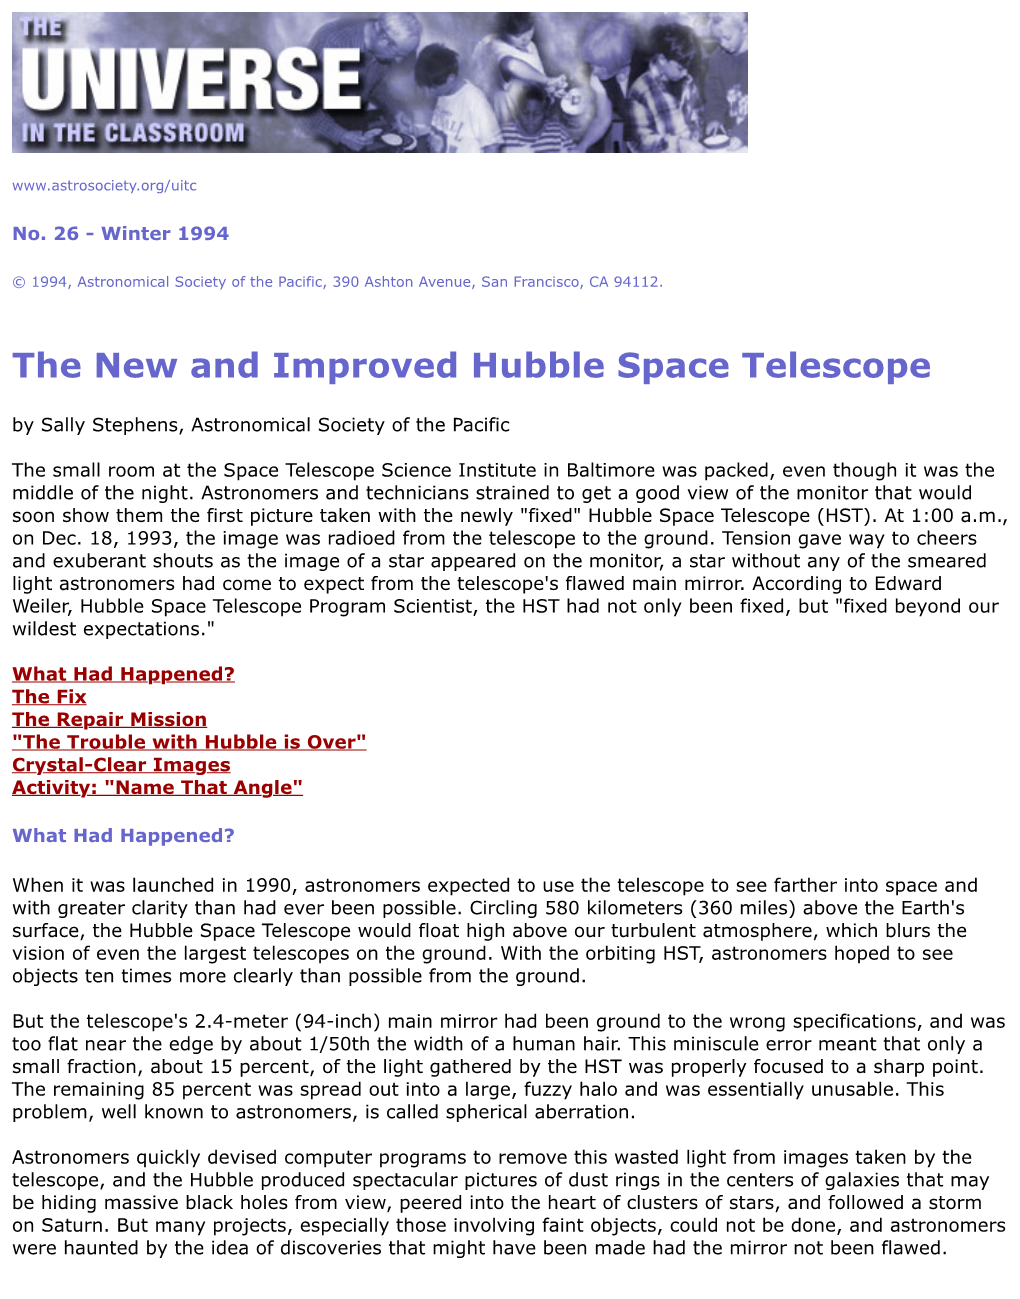 The New and Improved Hubble Space Telescope by Sally Stephens, Astronomical Society of the Pacific